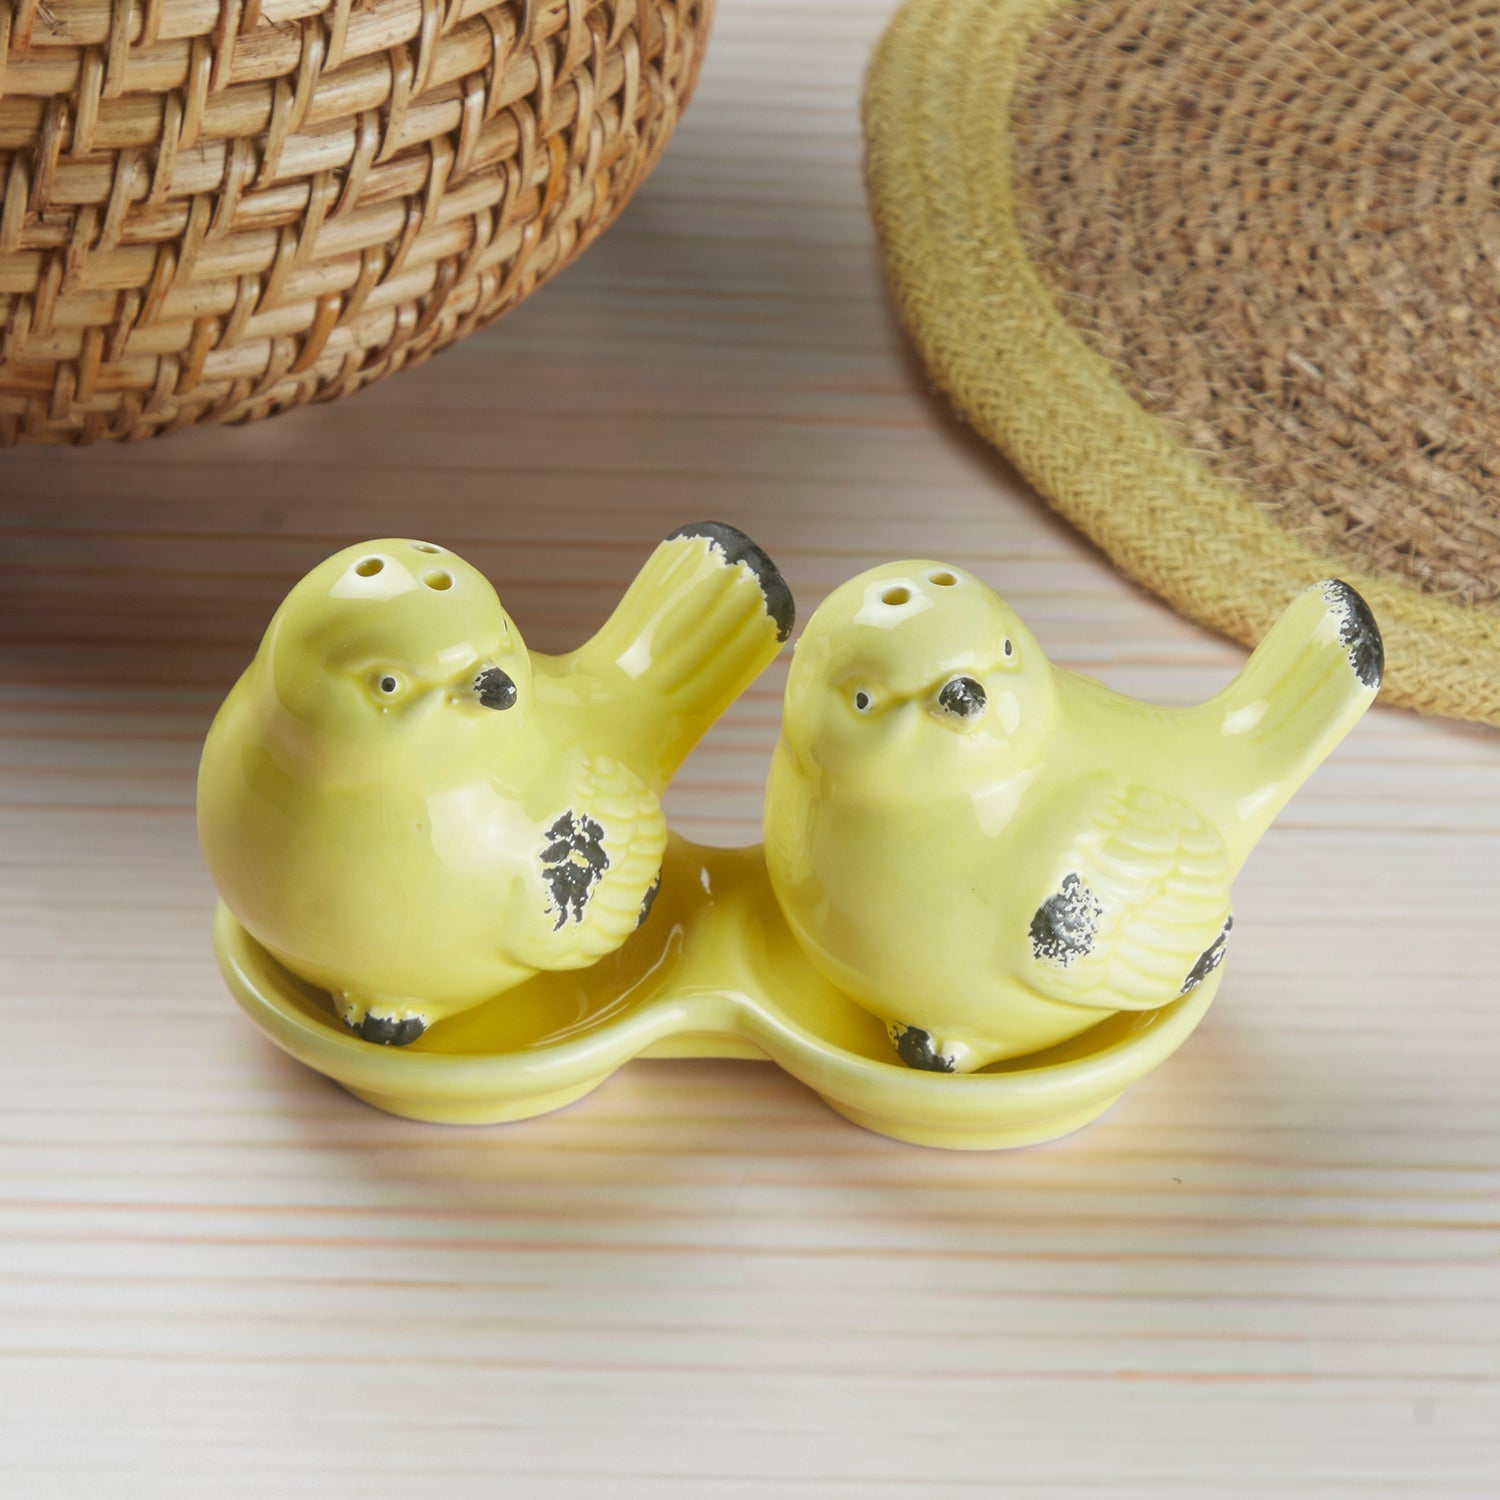 Ceramic Salt and Pepper Set with tray, Sparrow, Yellow (10276)